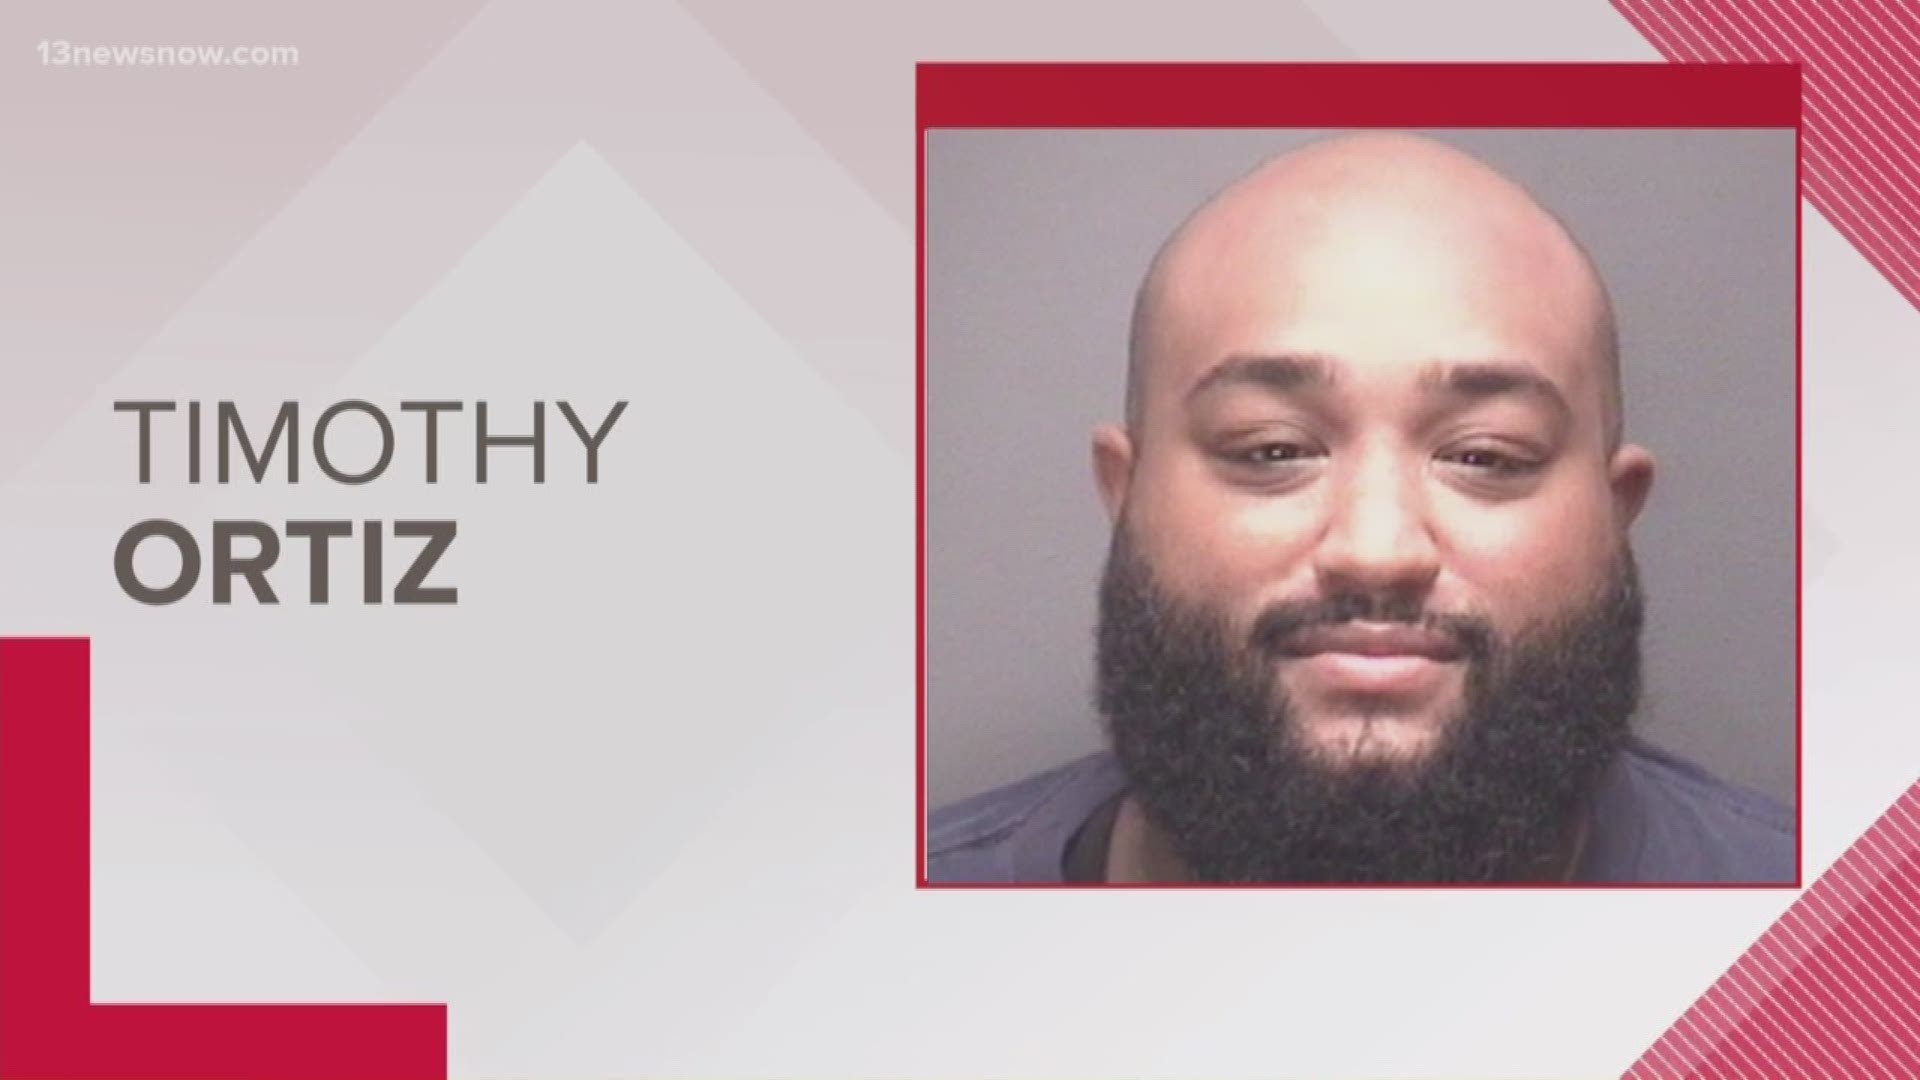 Timothy Ortiz, 29, was arrested for object sexual penetration, aggravated sexual battery and other charges. Police said there were two victims and Ortiz knew them.